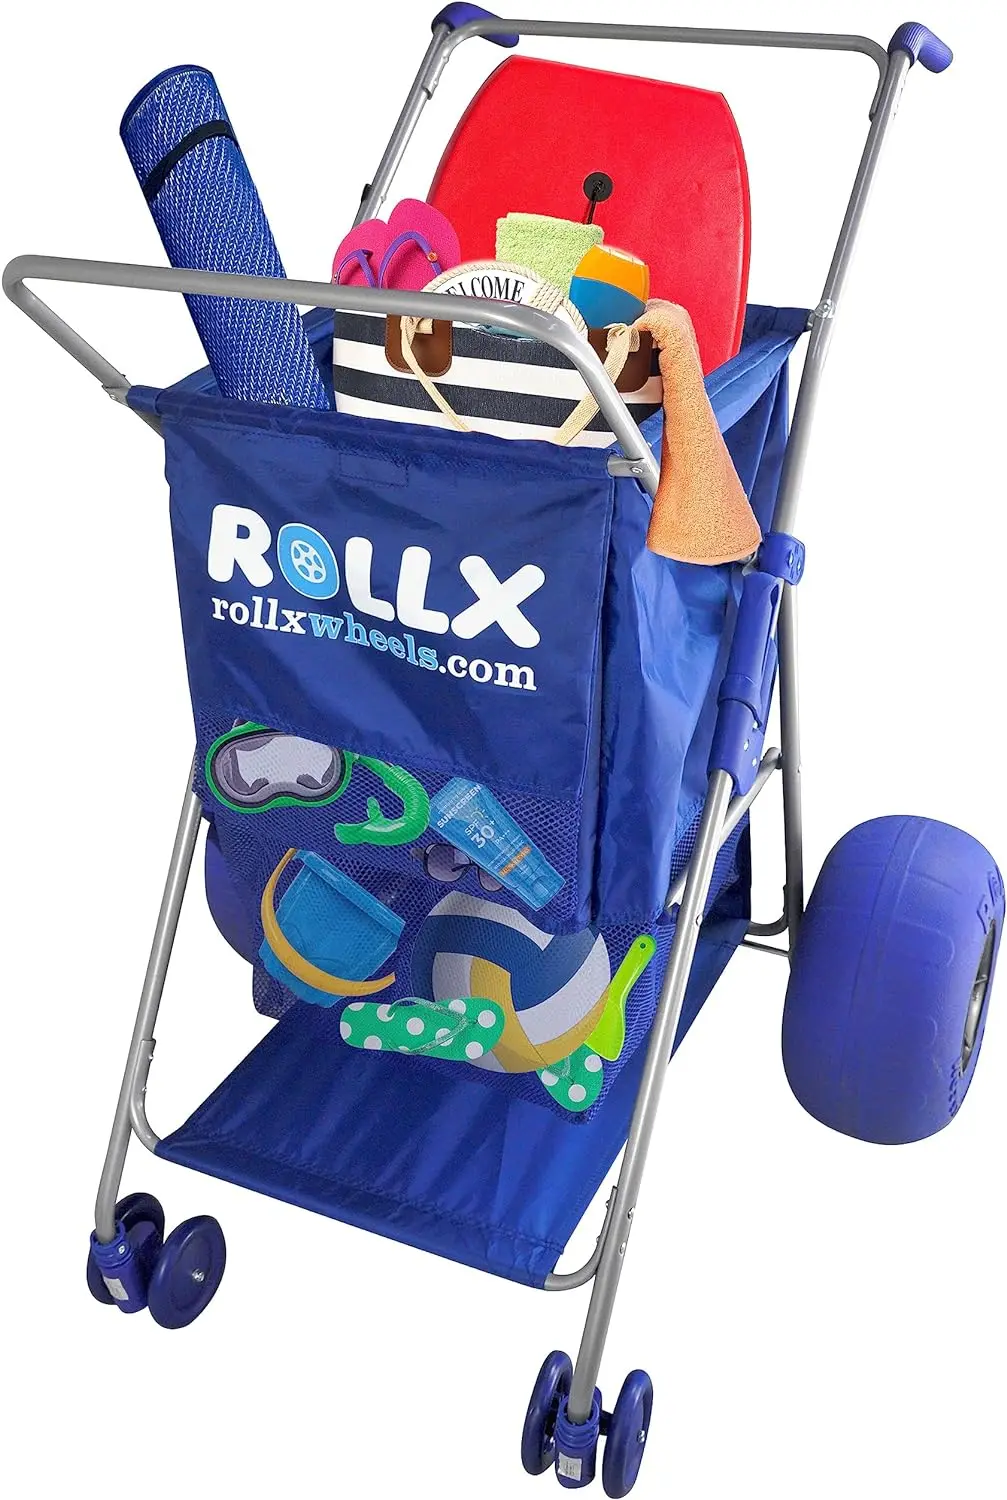 

RollX Big Balloon Wheel Beach Cart for Sand, Foldable Storage Wagon with Big 13 Inch Beach Tires (Pump Included) (Blue)